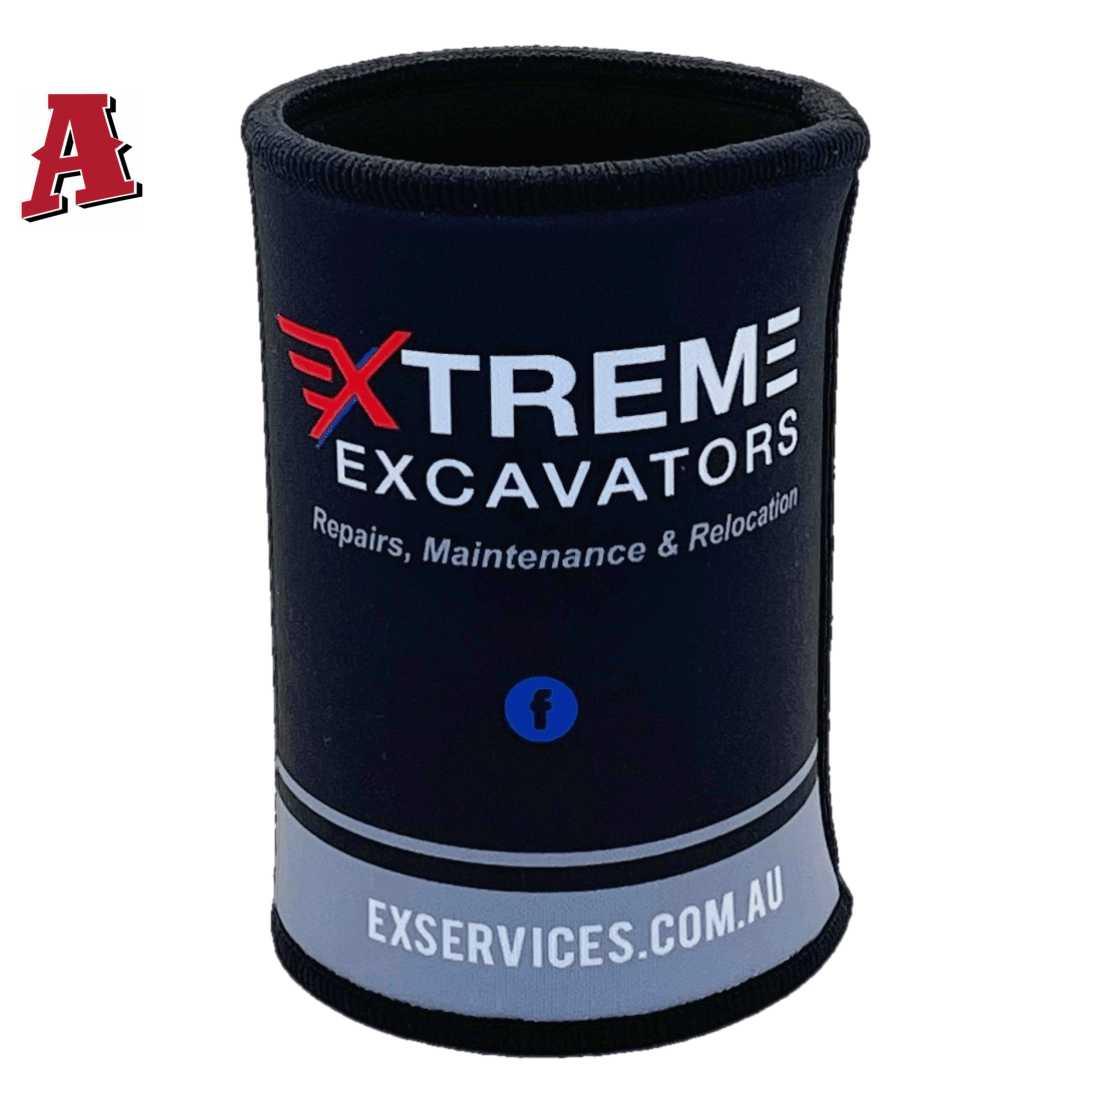 Extreme Excavators Paget Qld Custom Stubby Holder Koozies 5mm Neoprene with Glued Stitched Seams Top Bottom Black